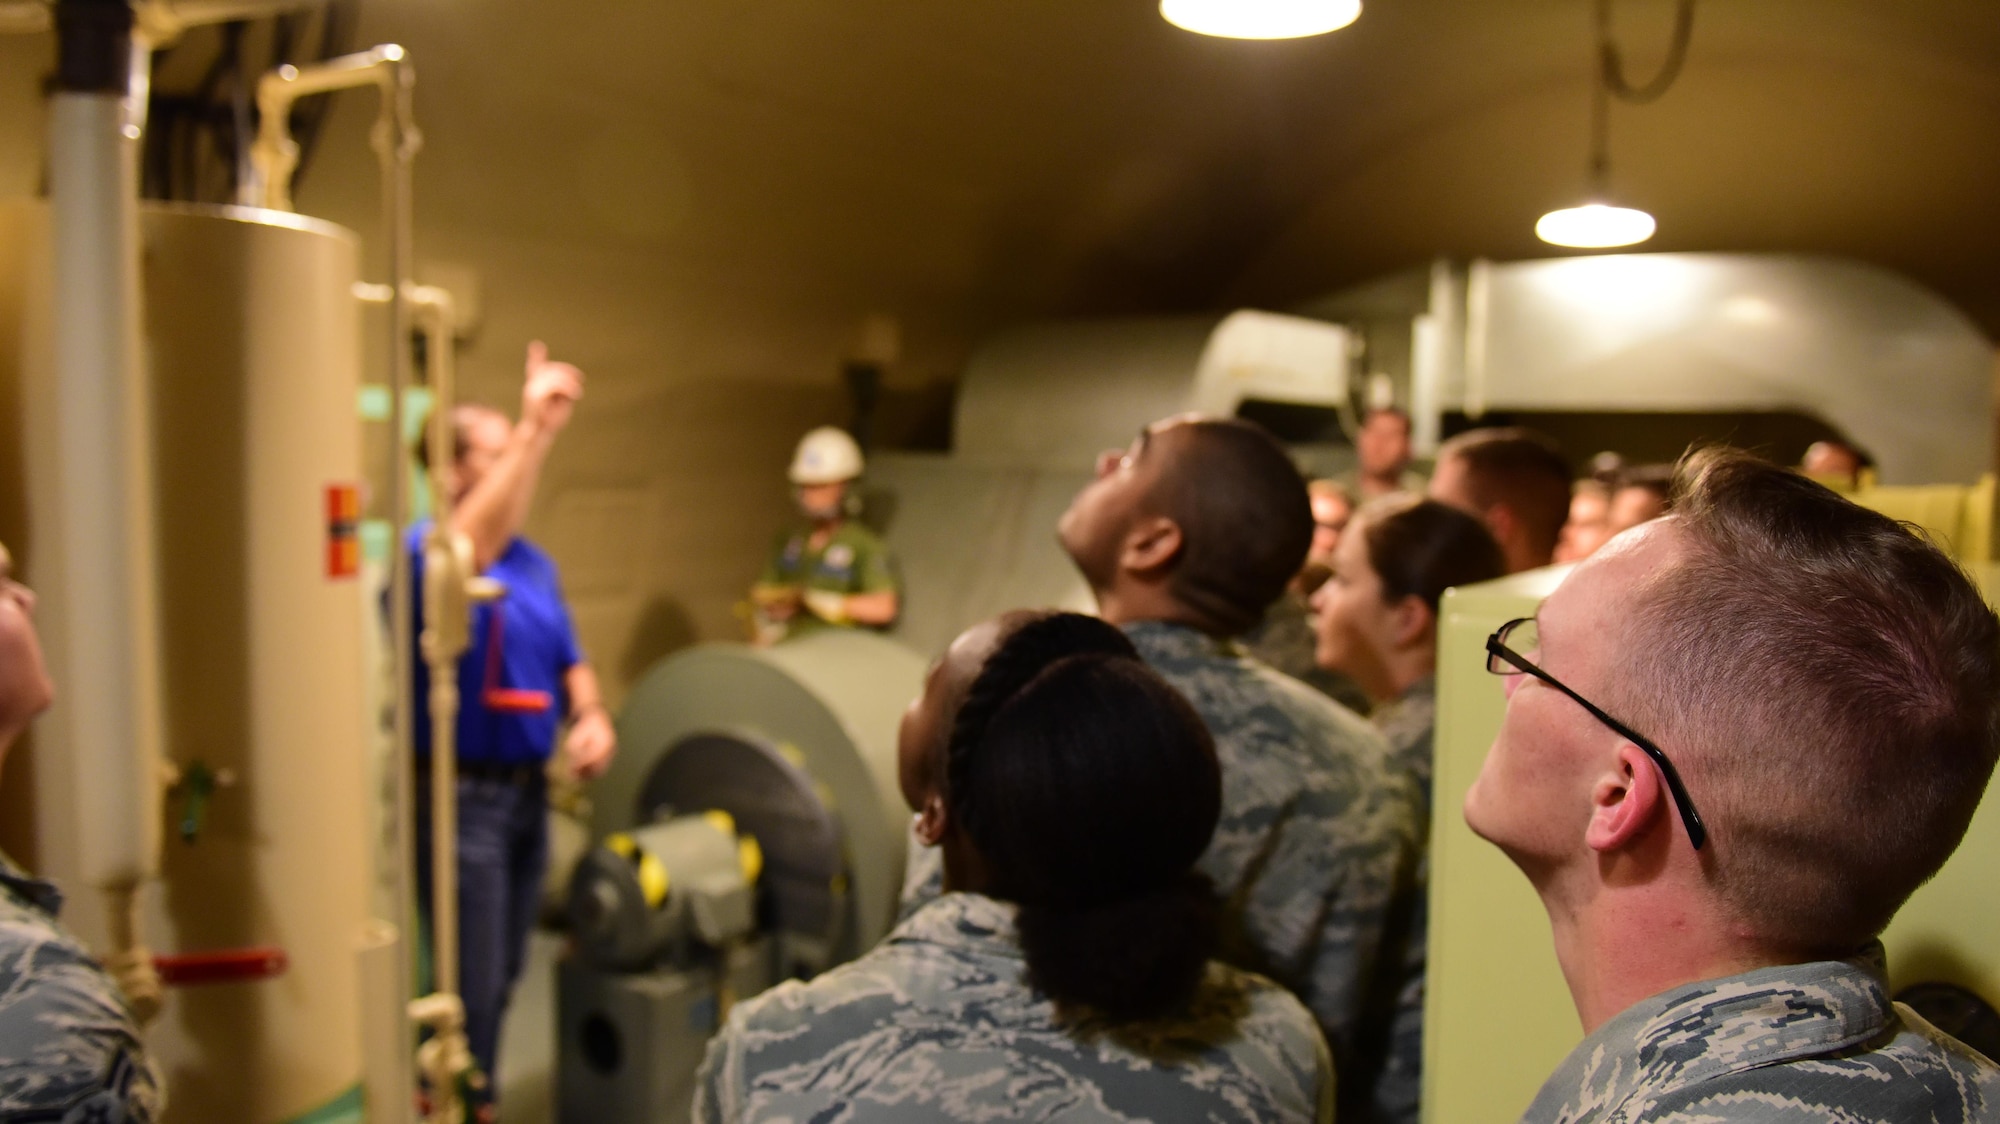 David Grisdale, the director of historical property assigned to the 509th Bomb Wing, shows First Term Airmen Course Airmen a section of the Oscar-1 Minuteman Missile Alert Facility at Whiteman Air Force Base, Mo., Aug. 10, 2017. The tour was to help the Airmen understand Whiteman's history and involvement during the Cold War.